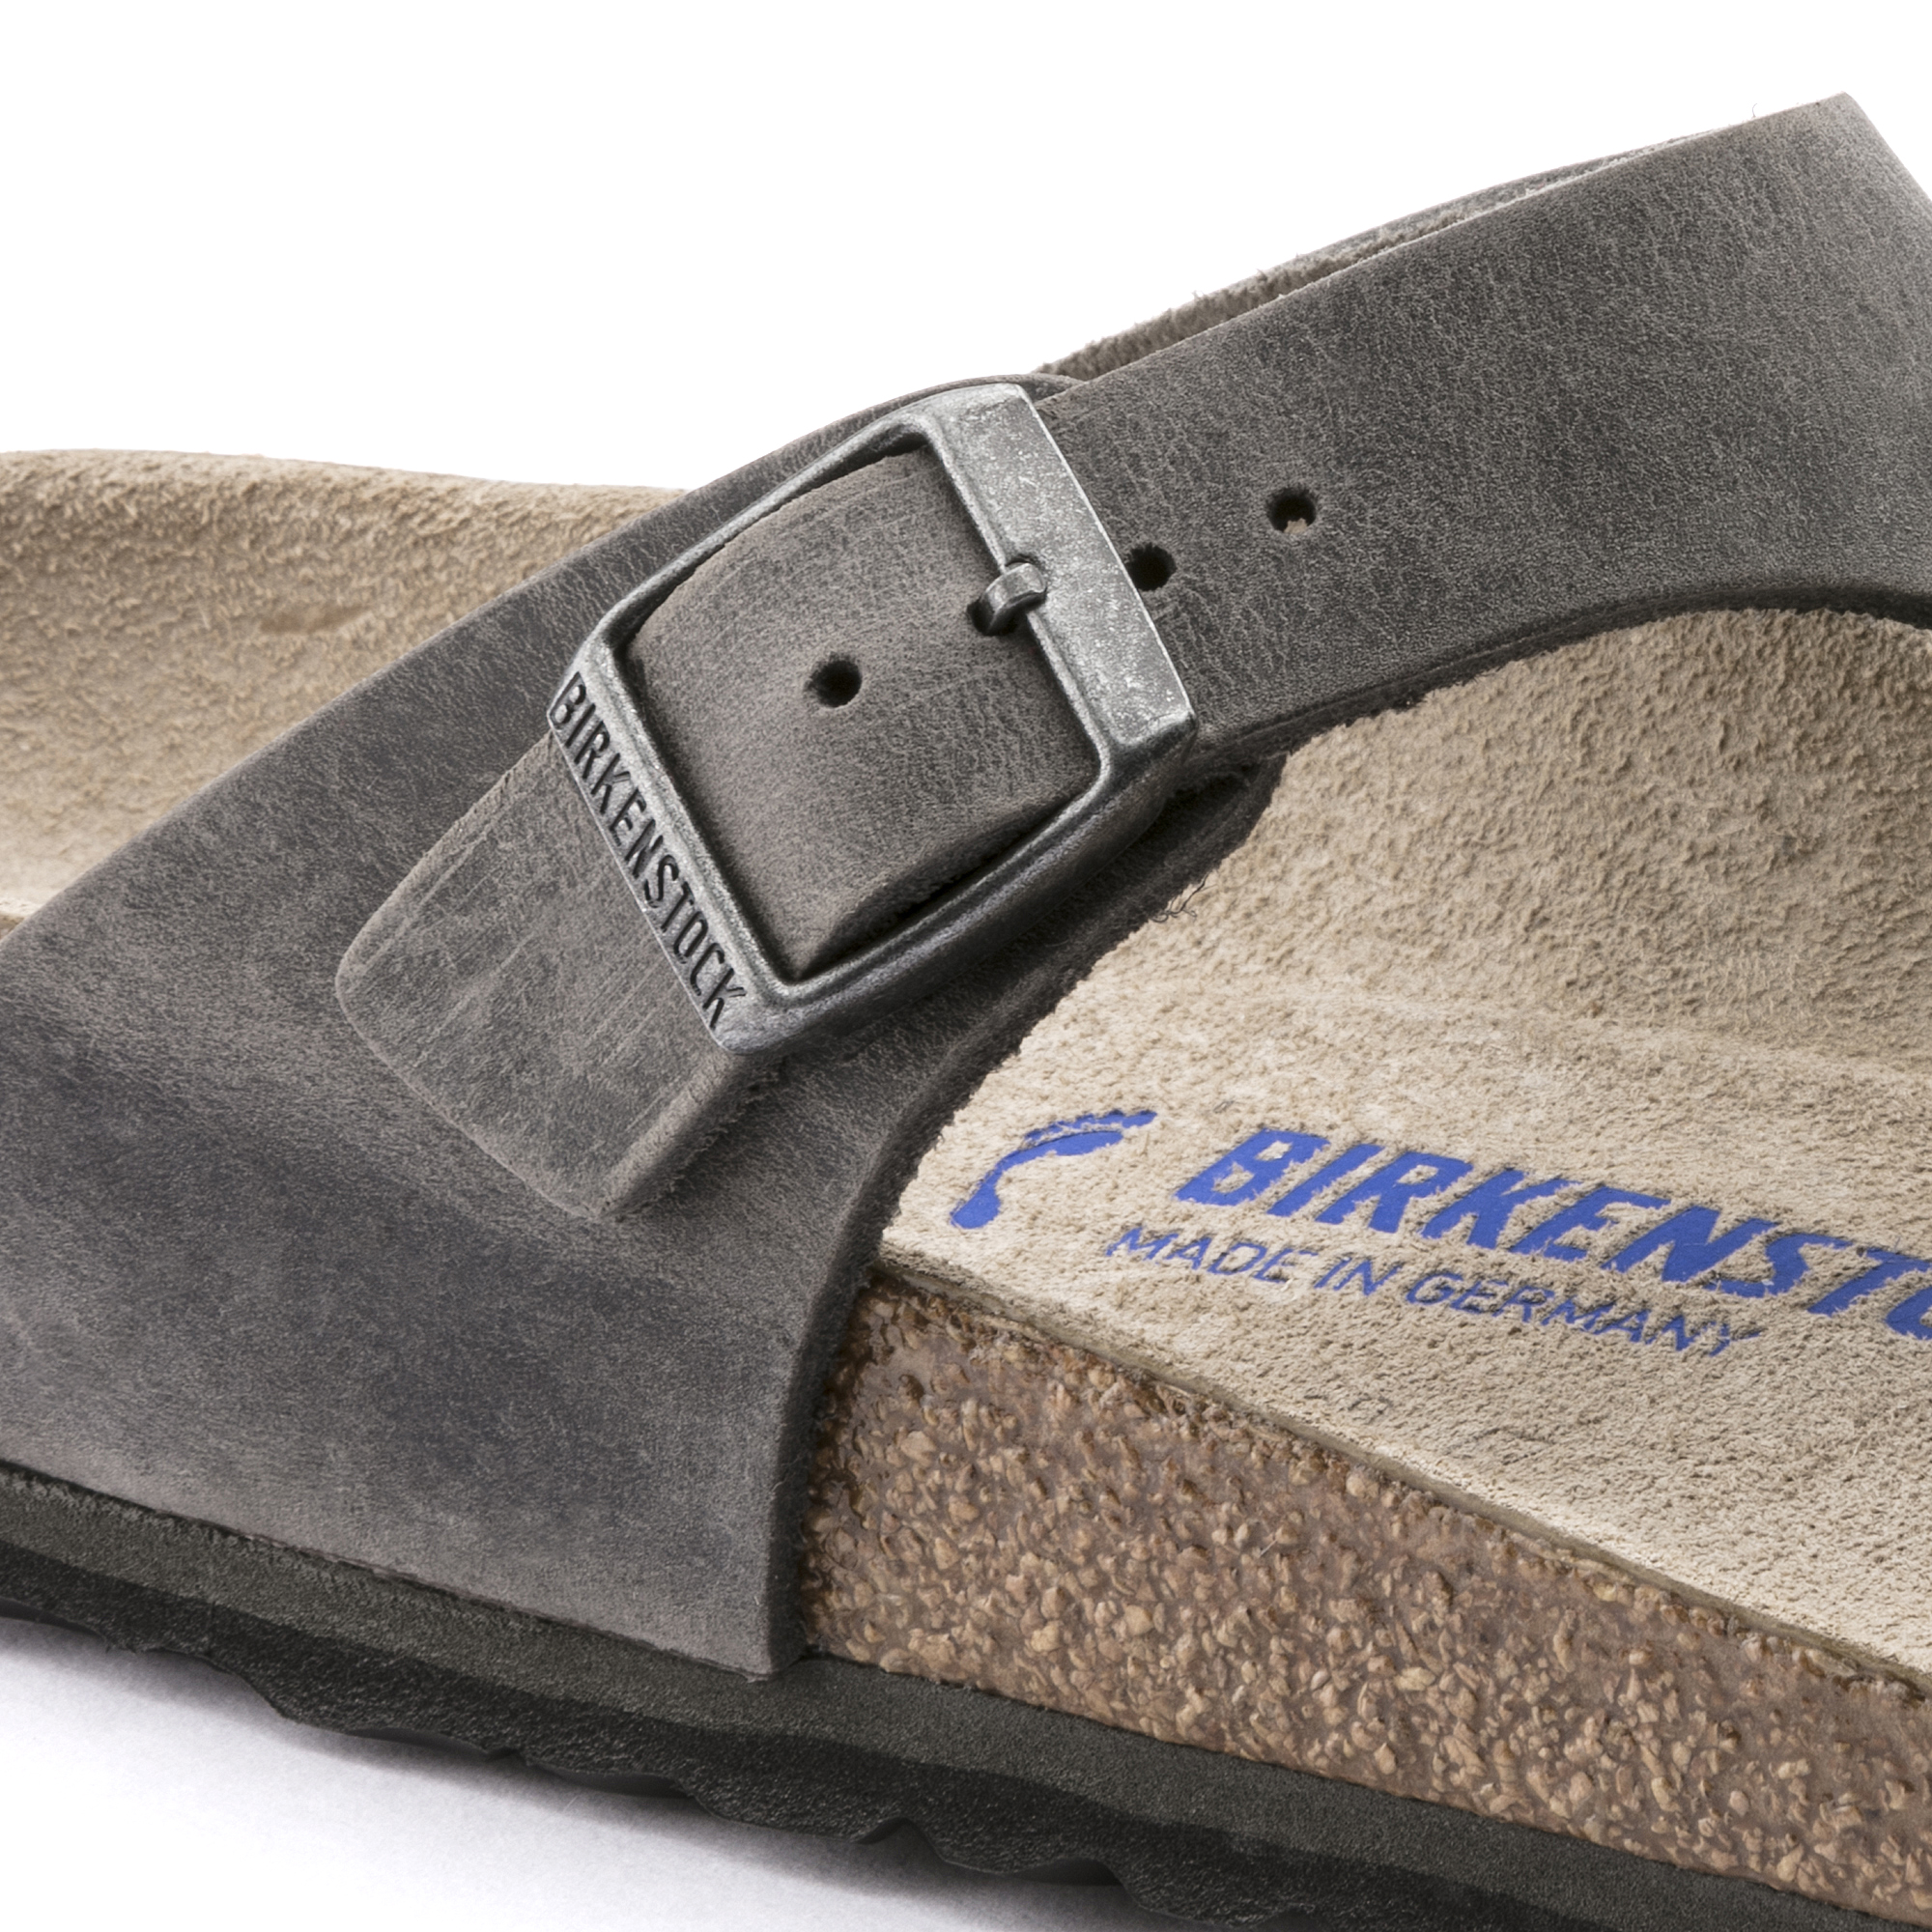 birkenstock gizeh iron oiled leather